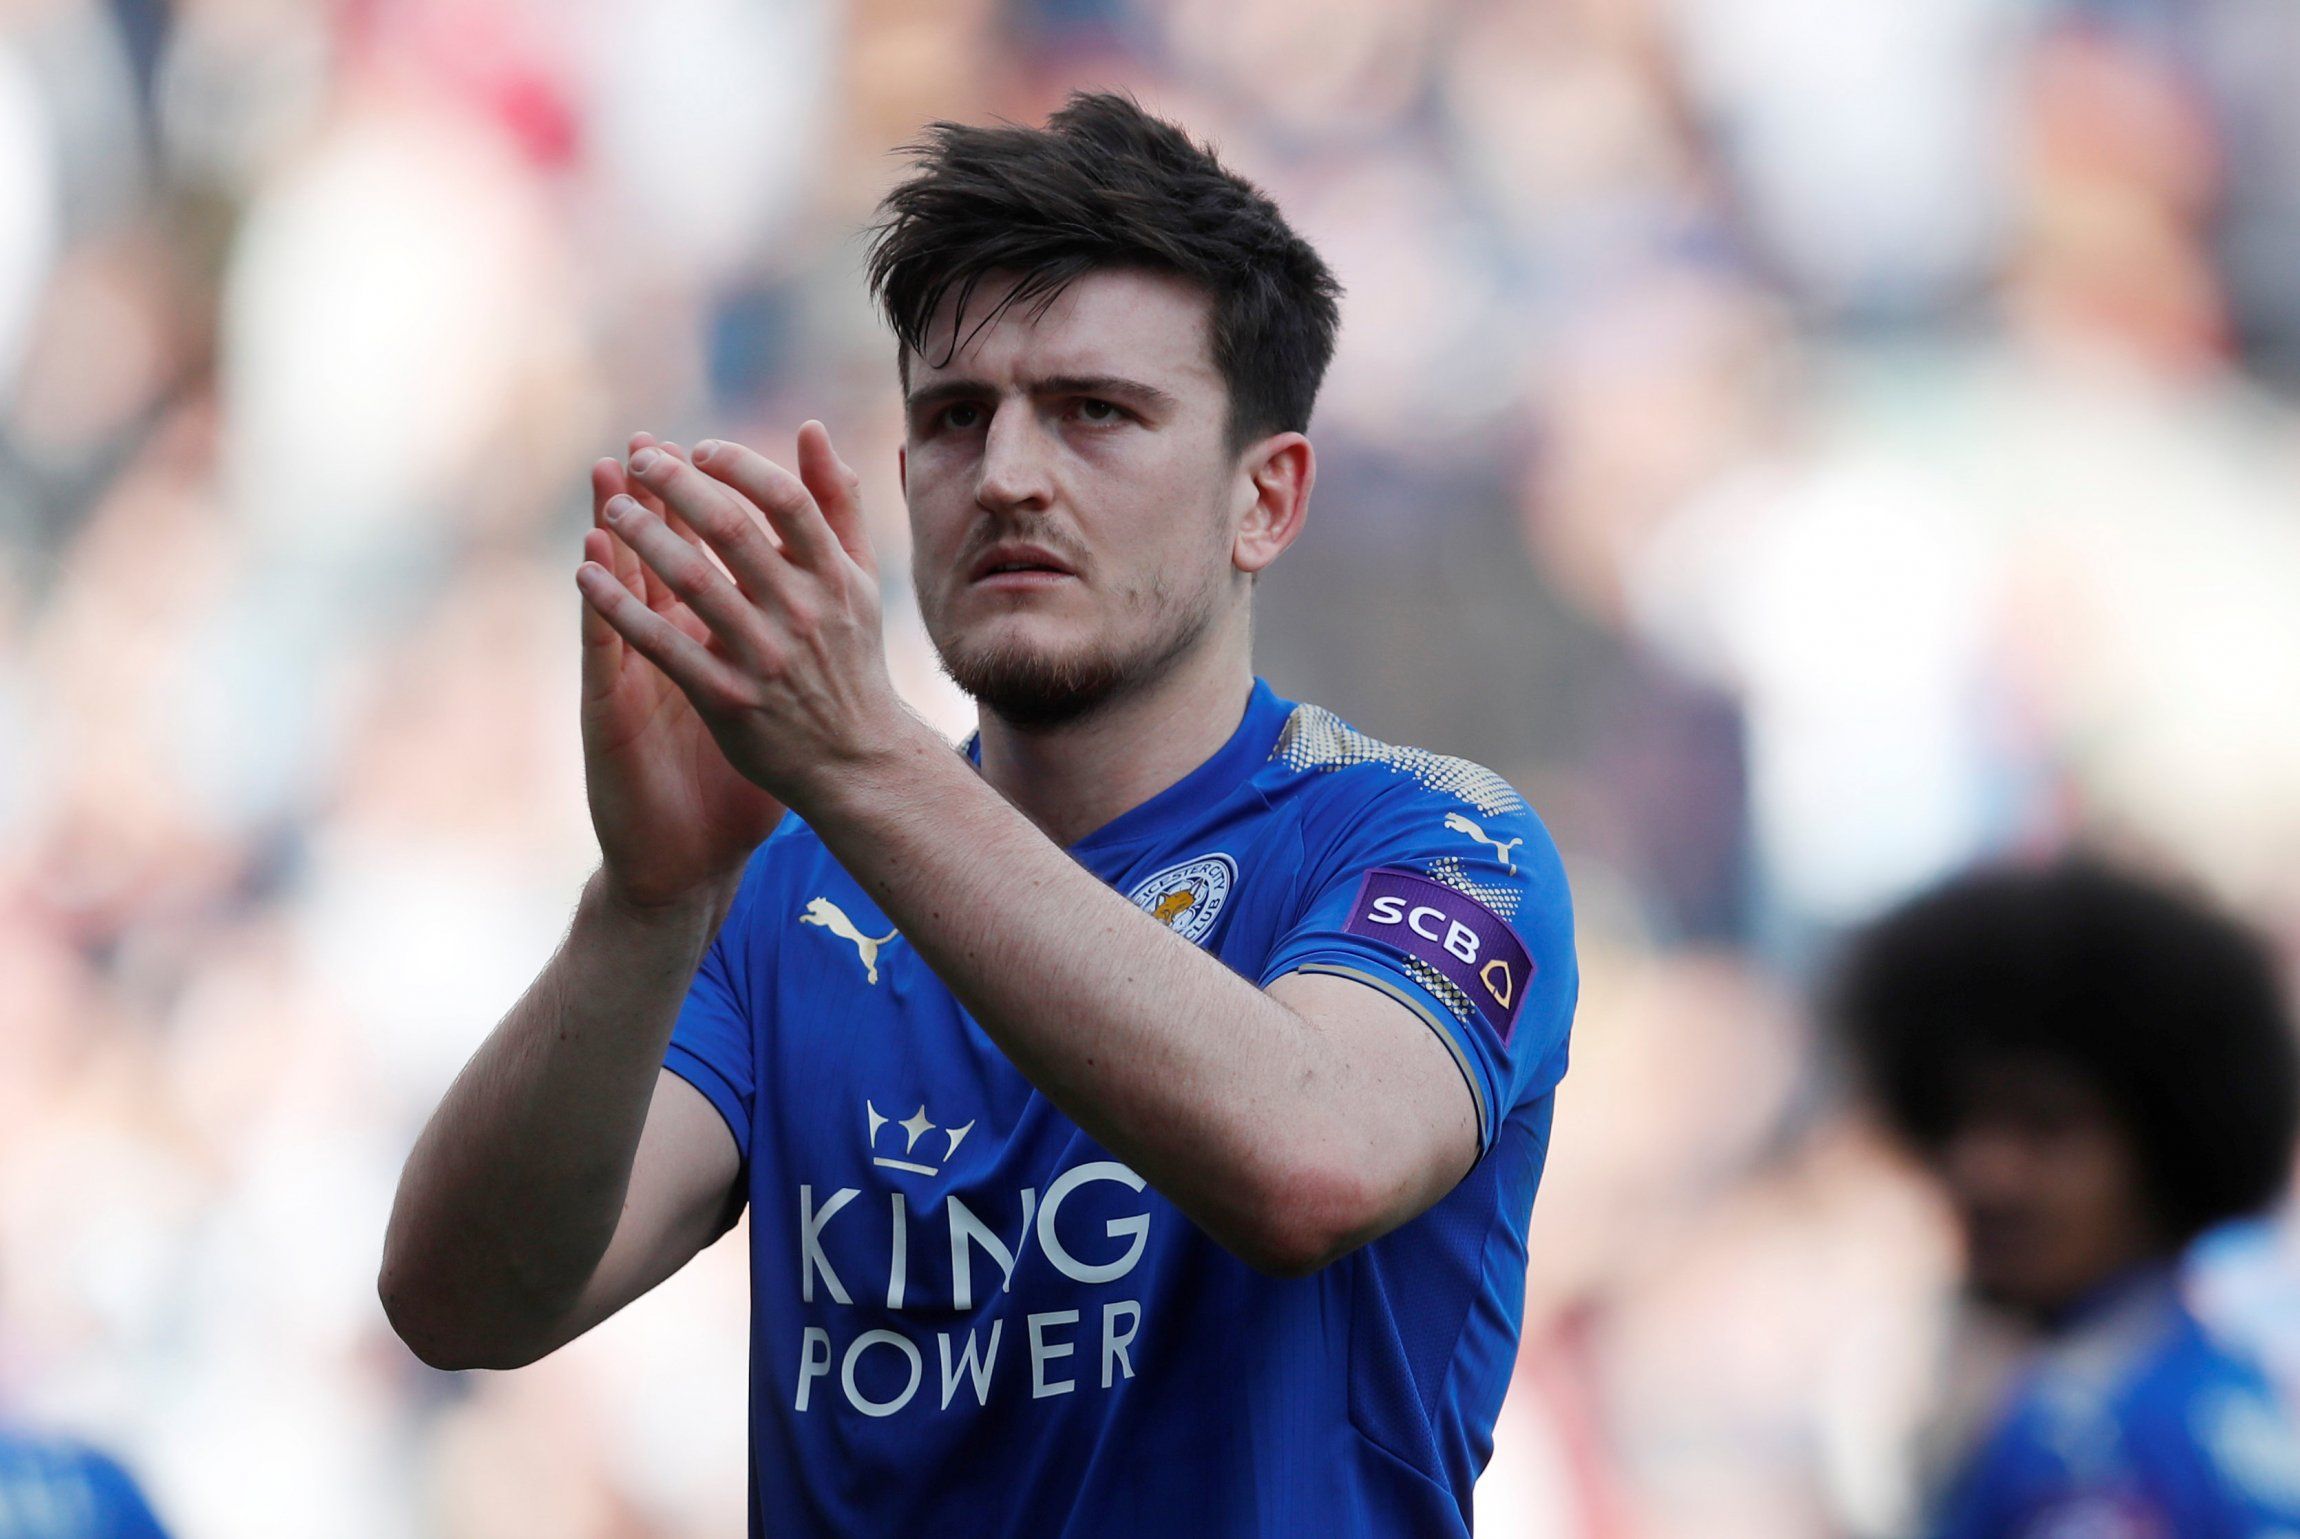 Leicester City defender Harry Maguire applauds supporters